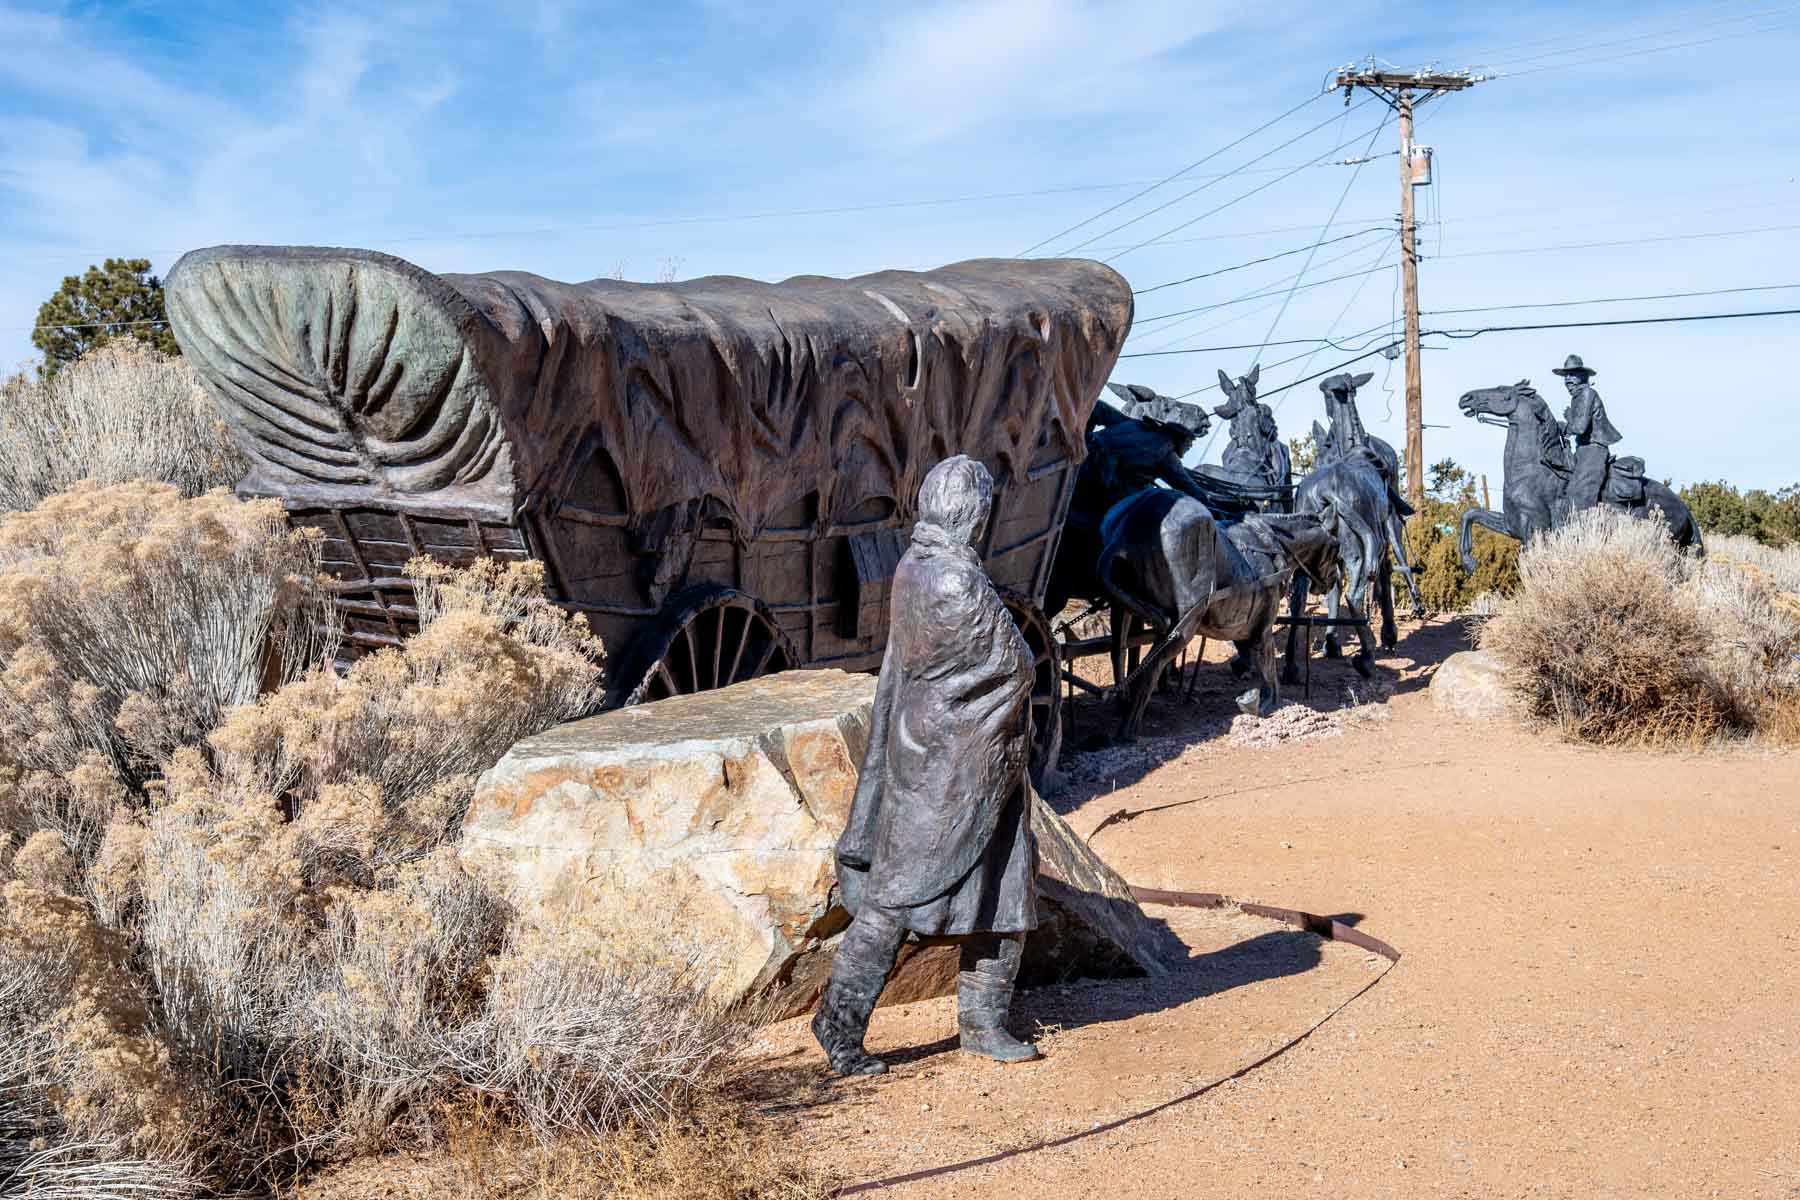 Statue of covered wagon with team of horses and rider on horseback with a woman walking